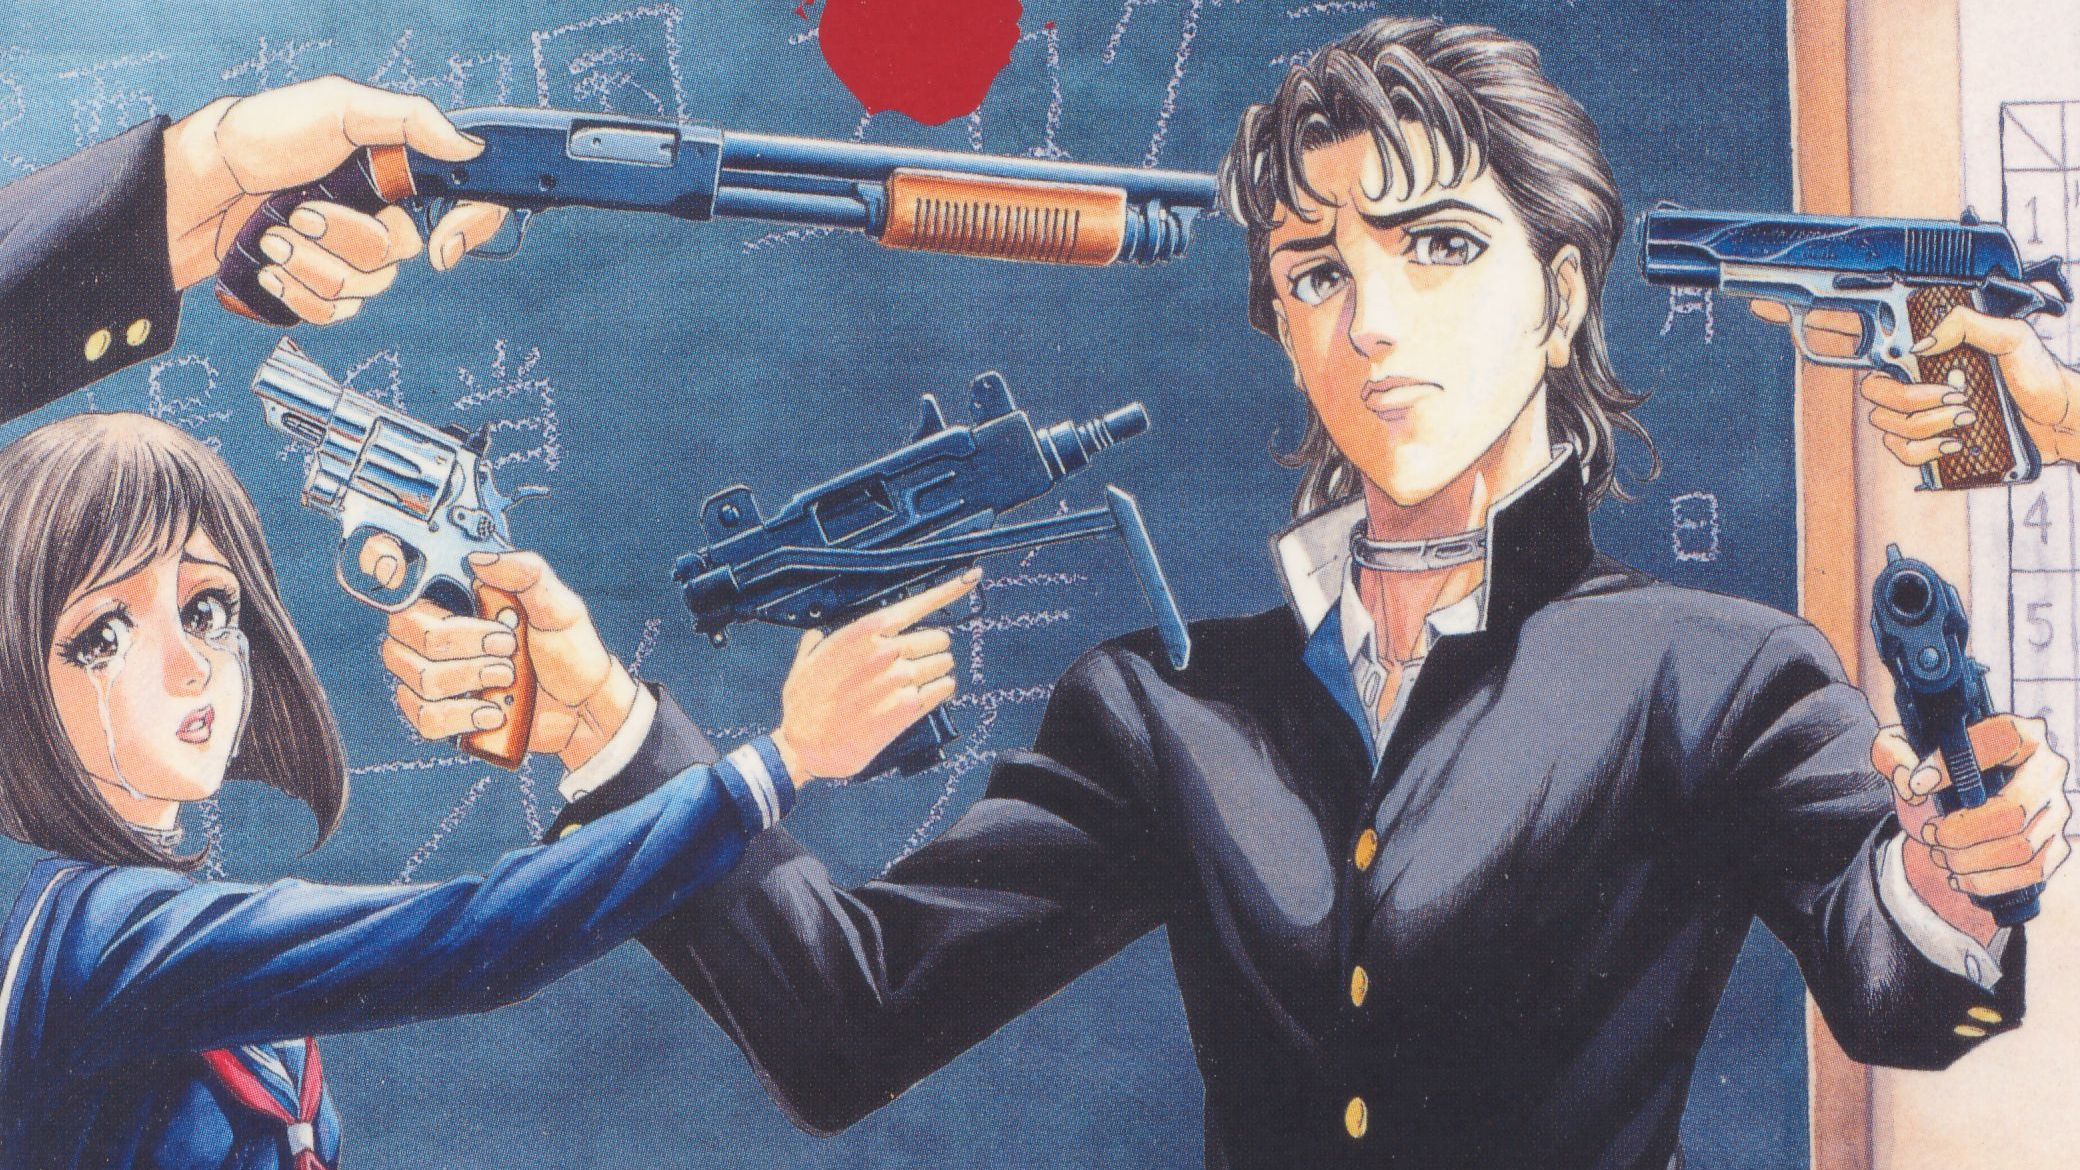 Why Blue Lock Is Different From Most Sports Anime  Manga